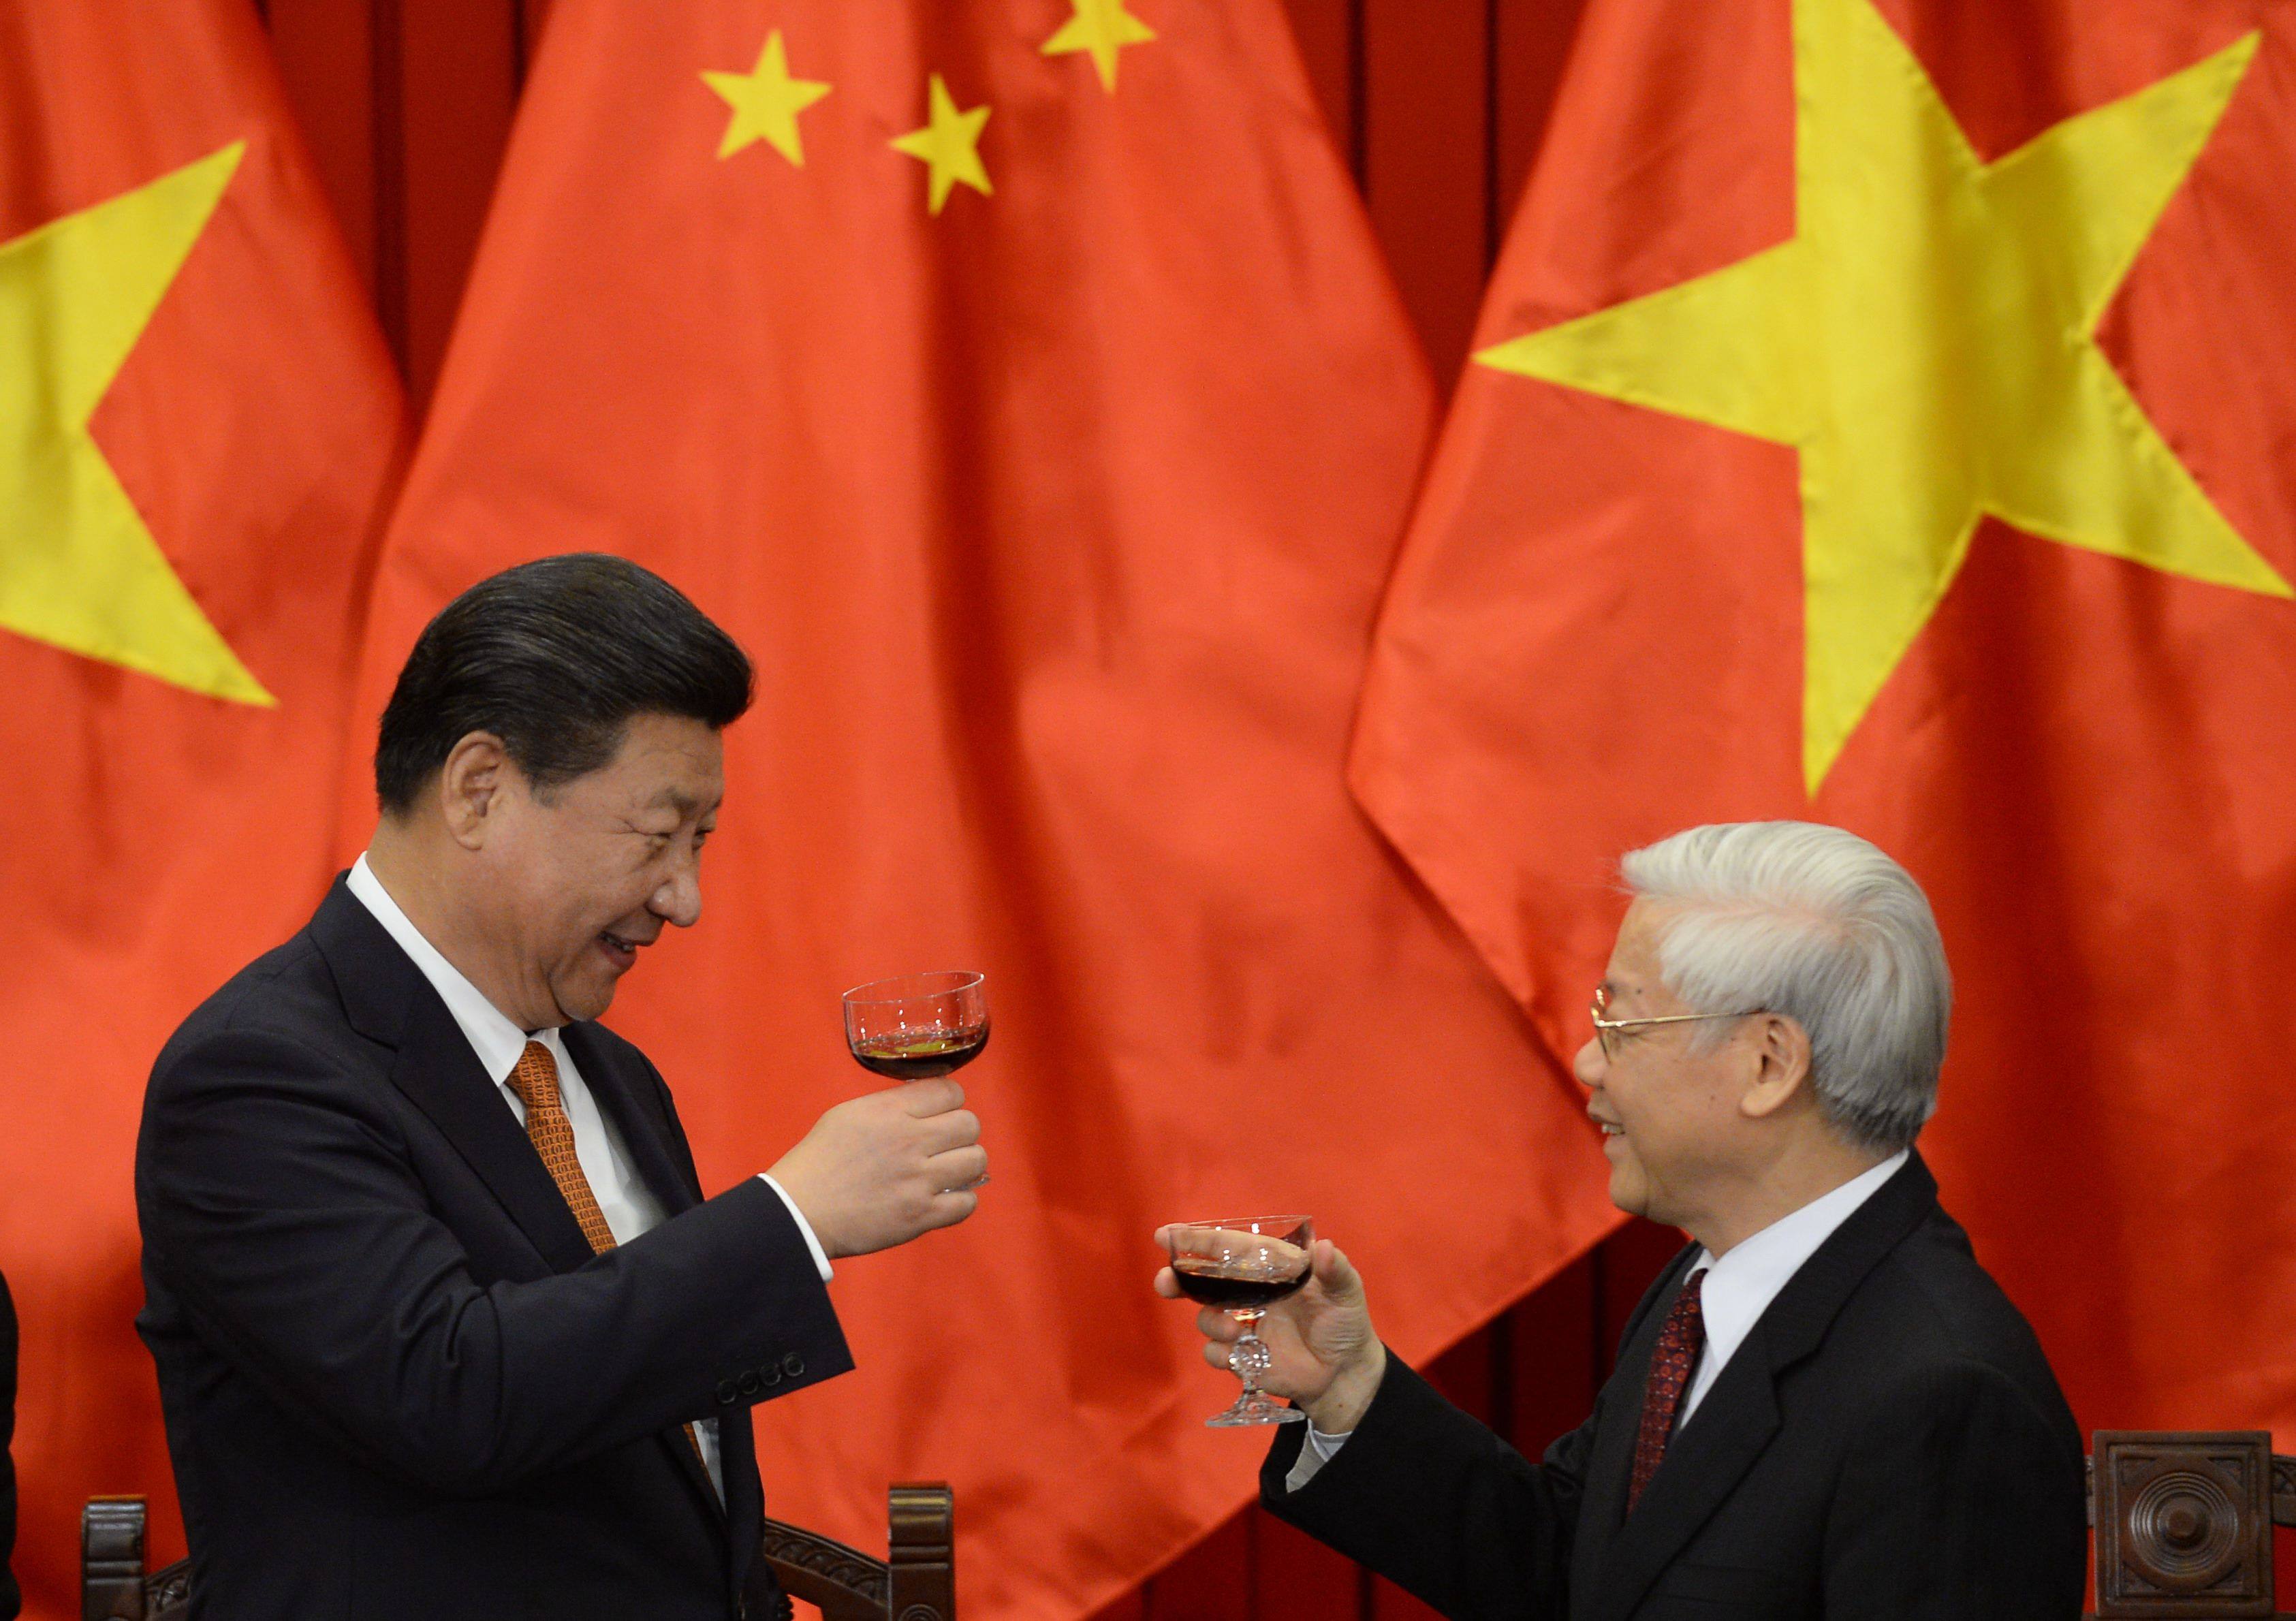 Chinese President Xi Jinping’s trip to Hanoi follows a visit to Beijing last year by Vietnam’s Communist Party chief Nguyen Phu Trong (right). They pledged to take relations to a new level. Photo: AFP
